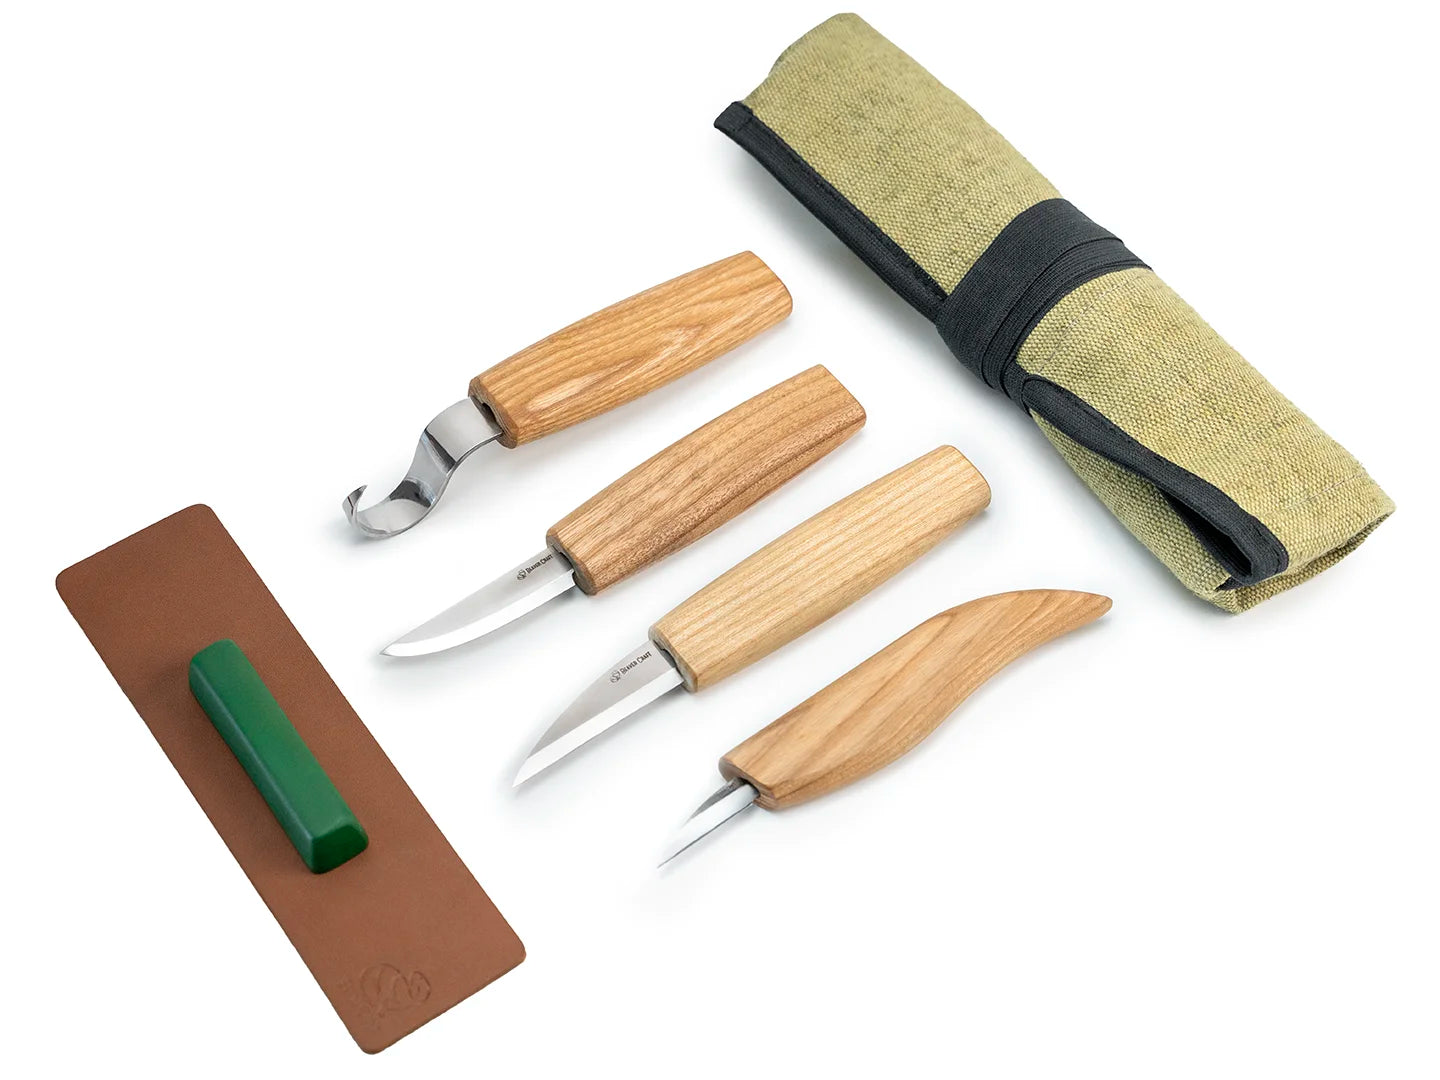 Professional spoon carving tools 4 knives & piece (Left-handed) –  BeaverCraft Tools